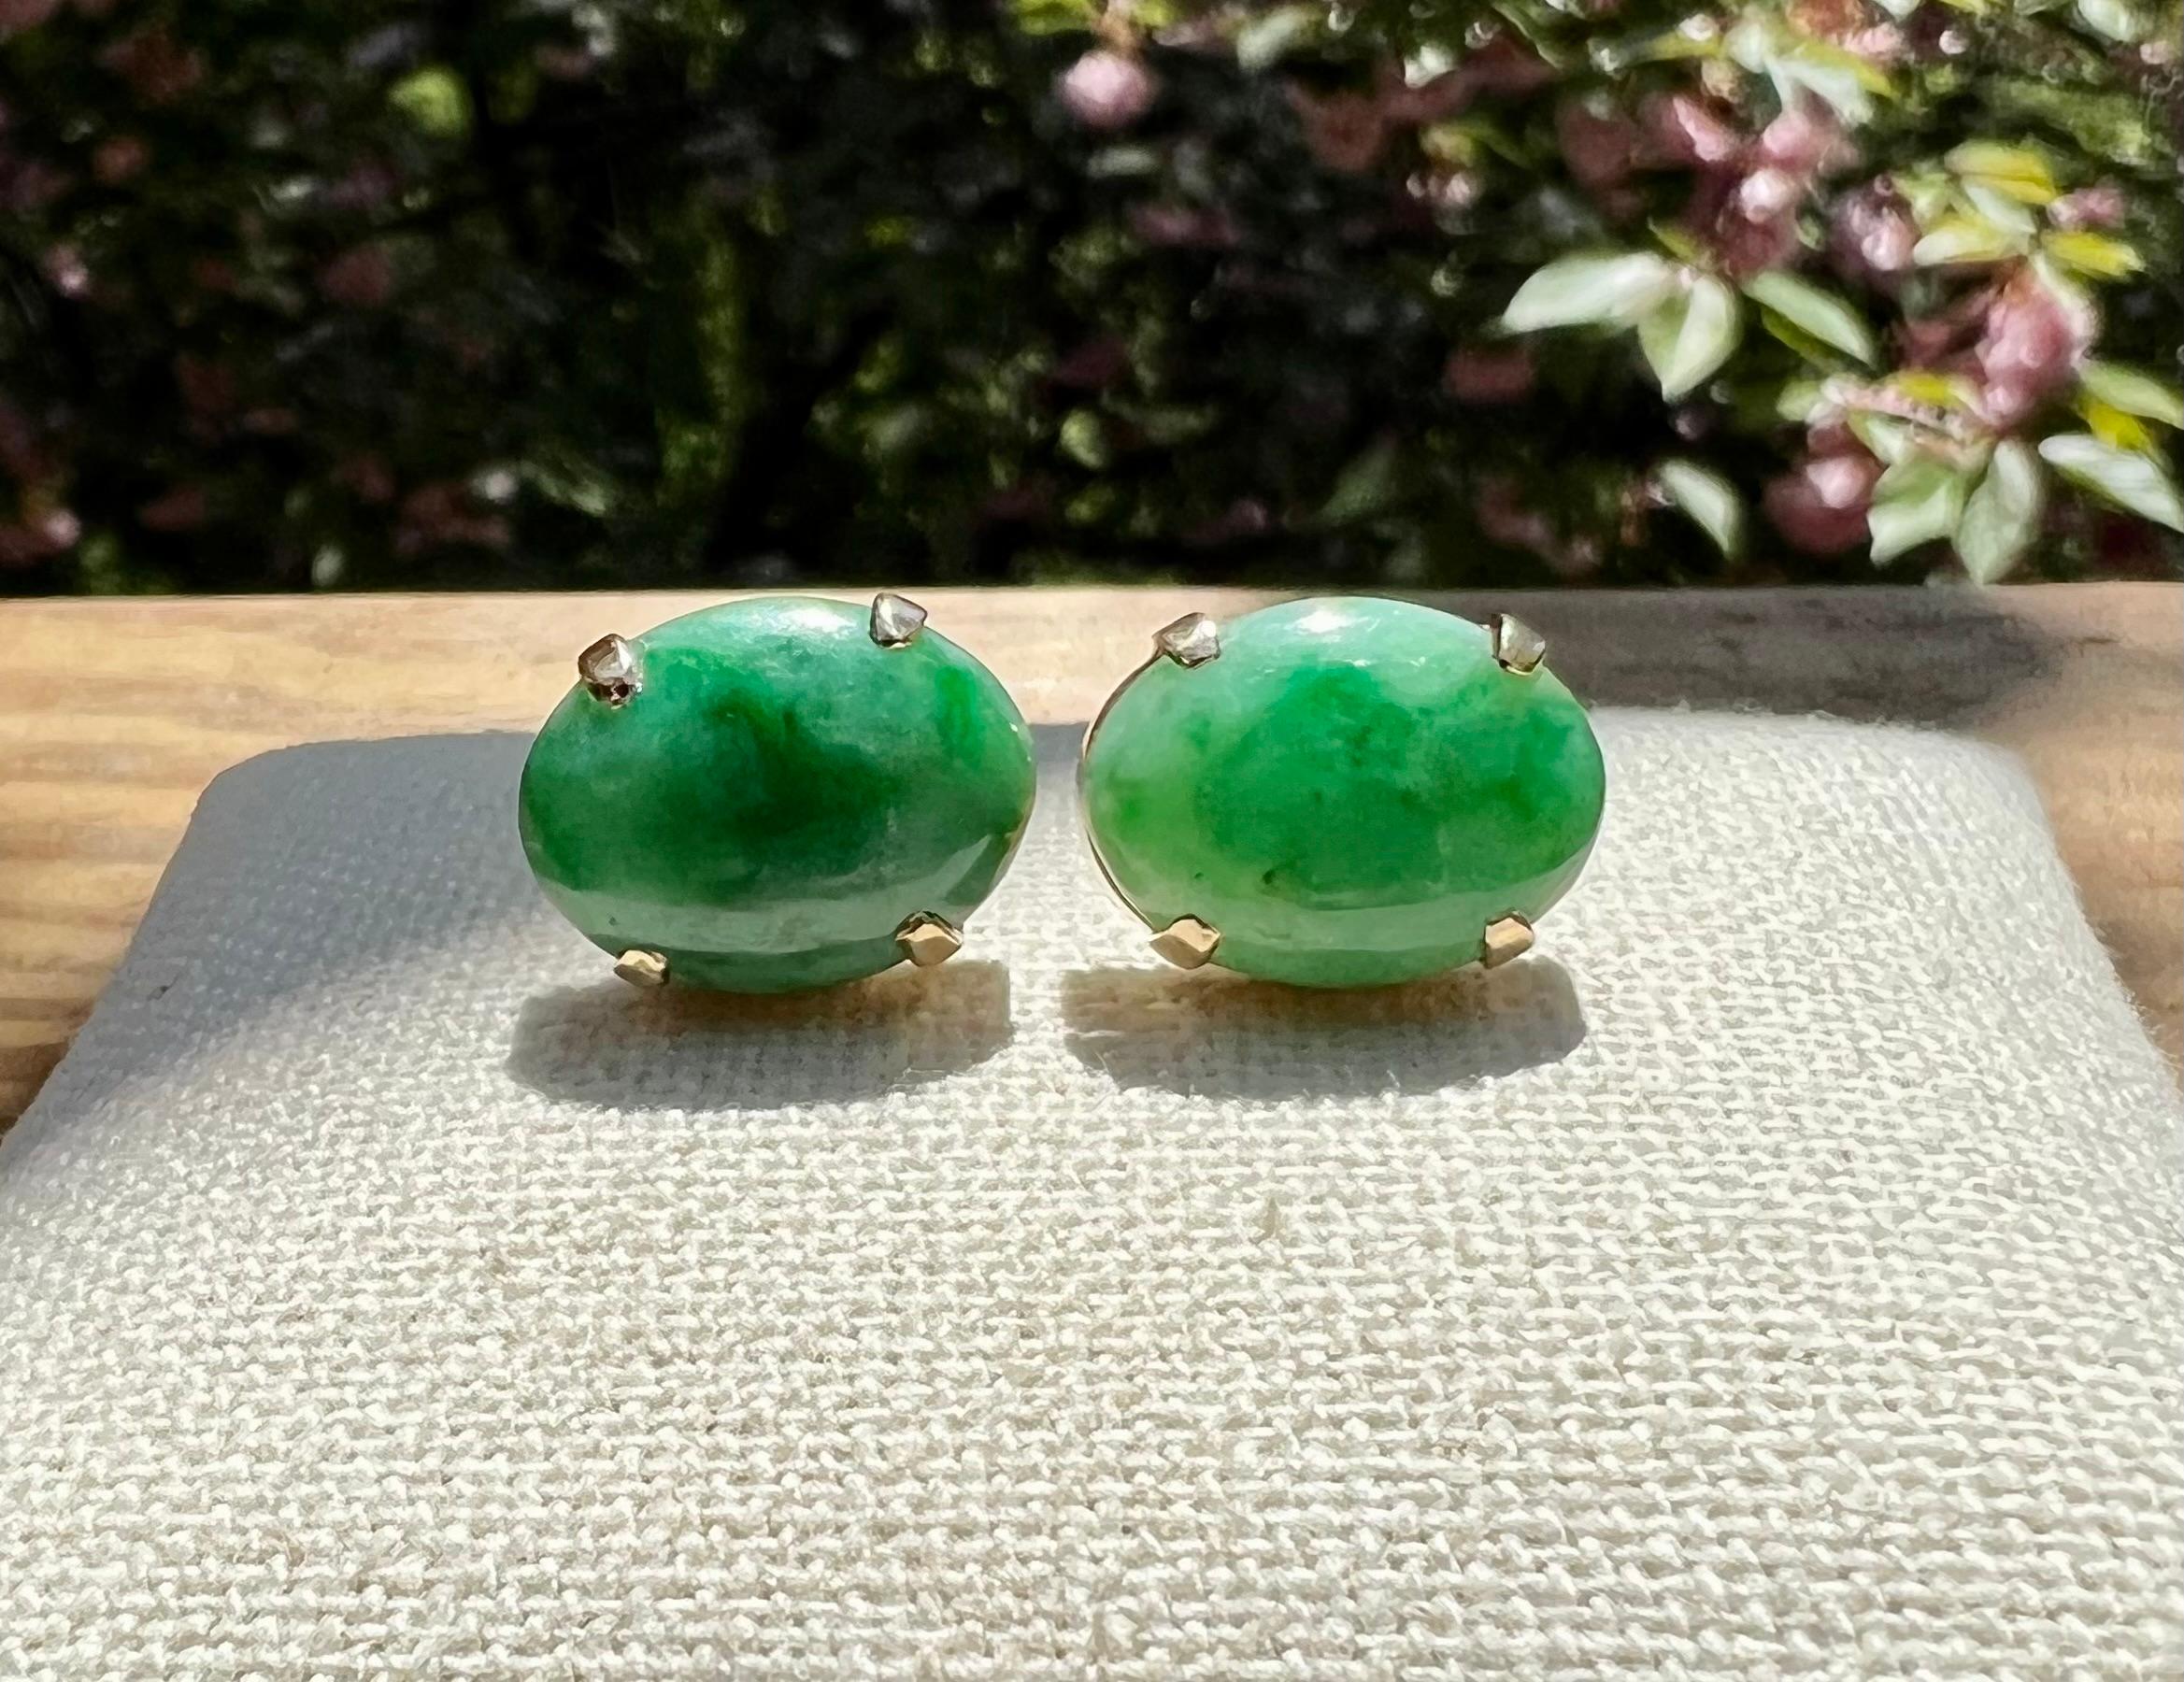 One pair of 14 karat yellow gold (stamped 14K) earrings, each set with one 16 x 12mm oval jade stone.  The earrings are complete with friction posts and backs.  